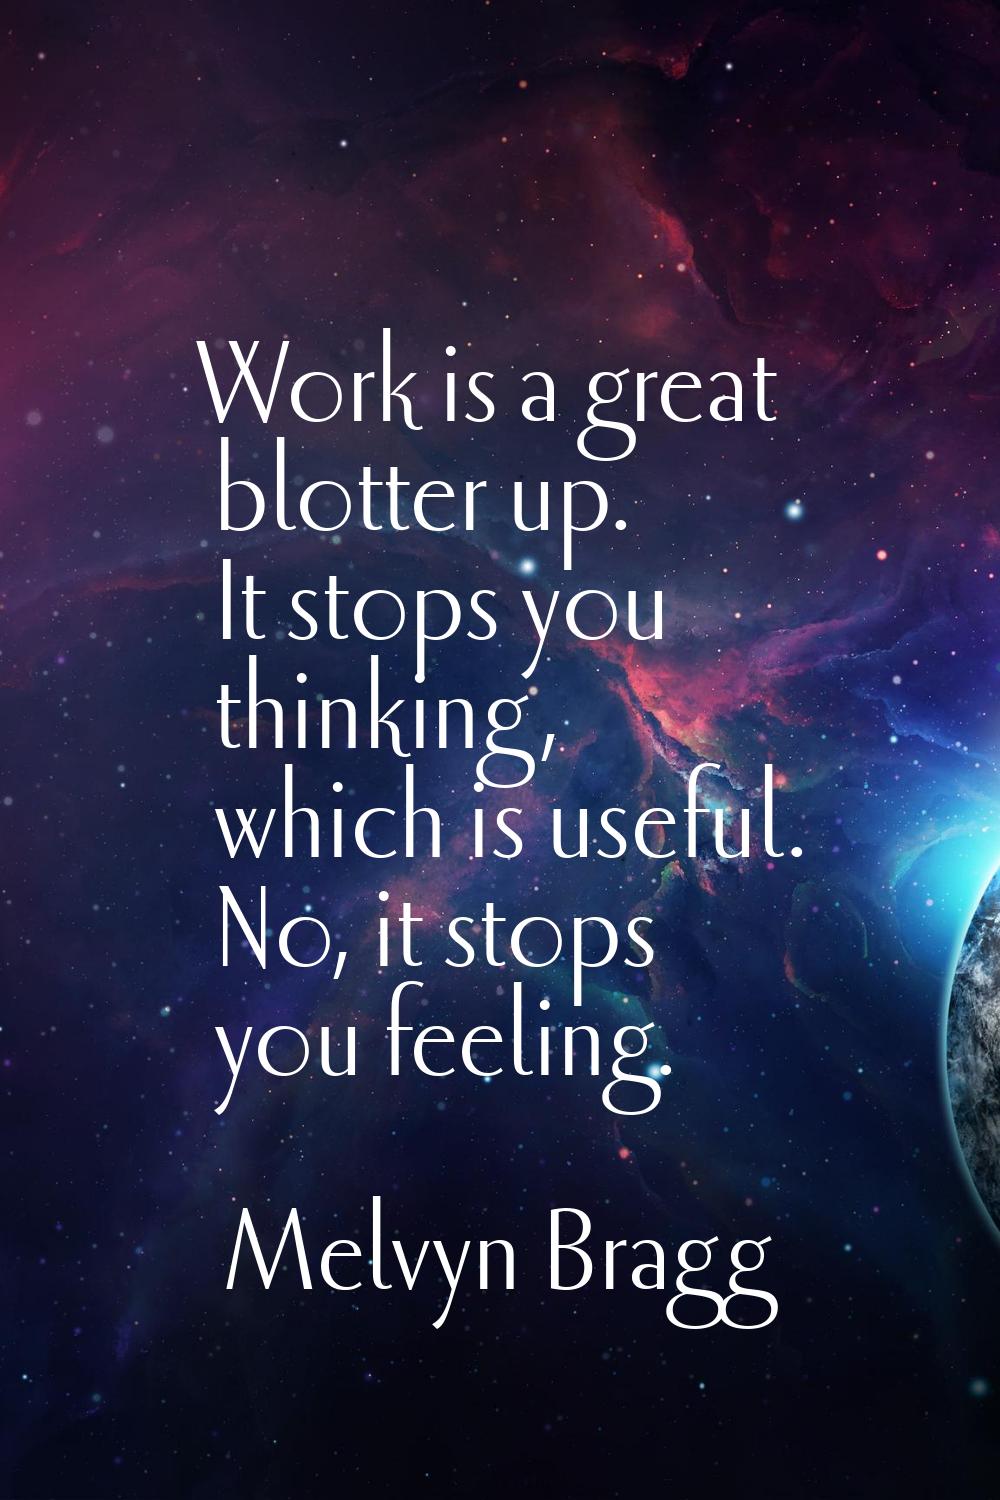 Work is a great blotter up. It stops you thinking, which is useful. No, it stops you feeling.